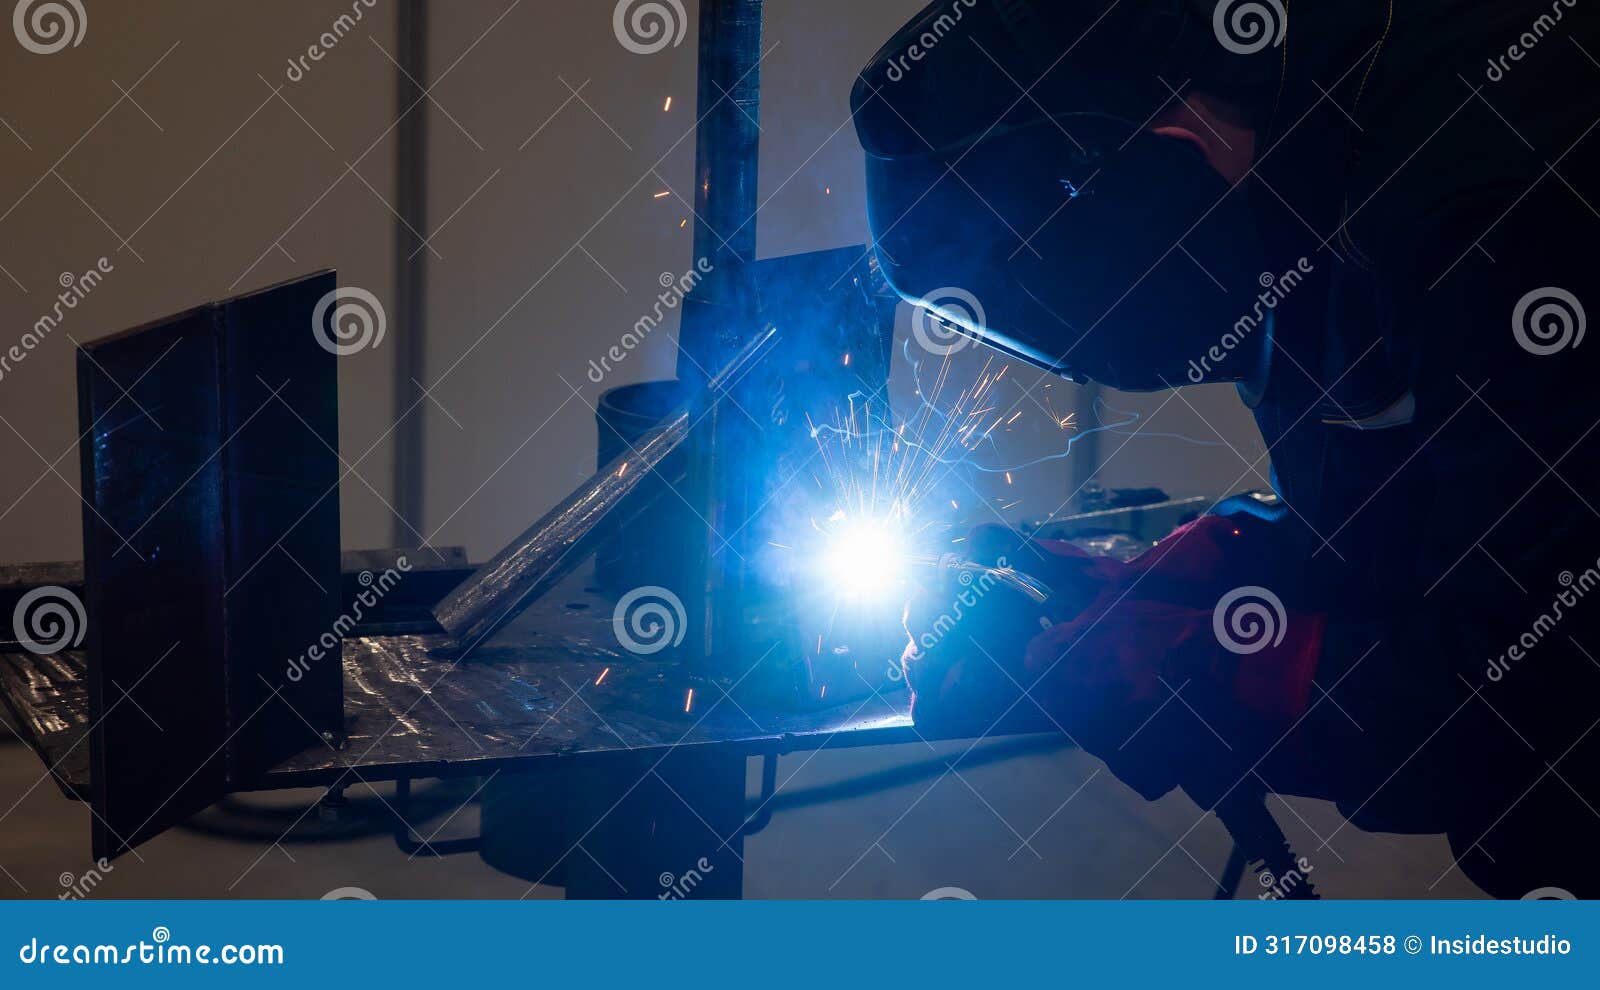 competitions among welders. a man in a protective mask is welding.